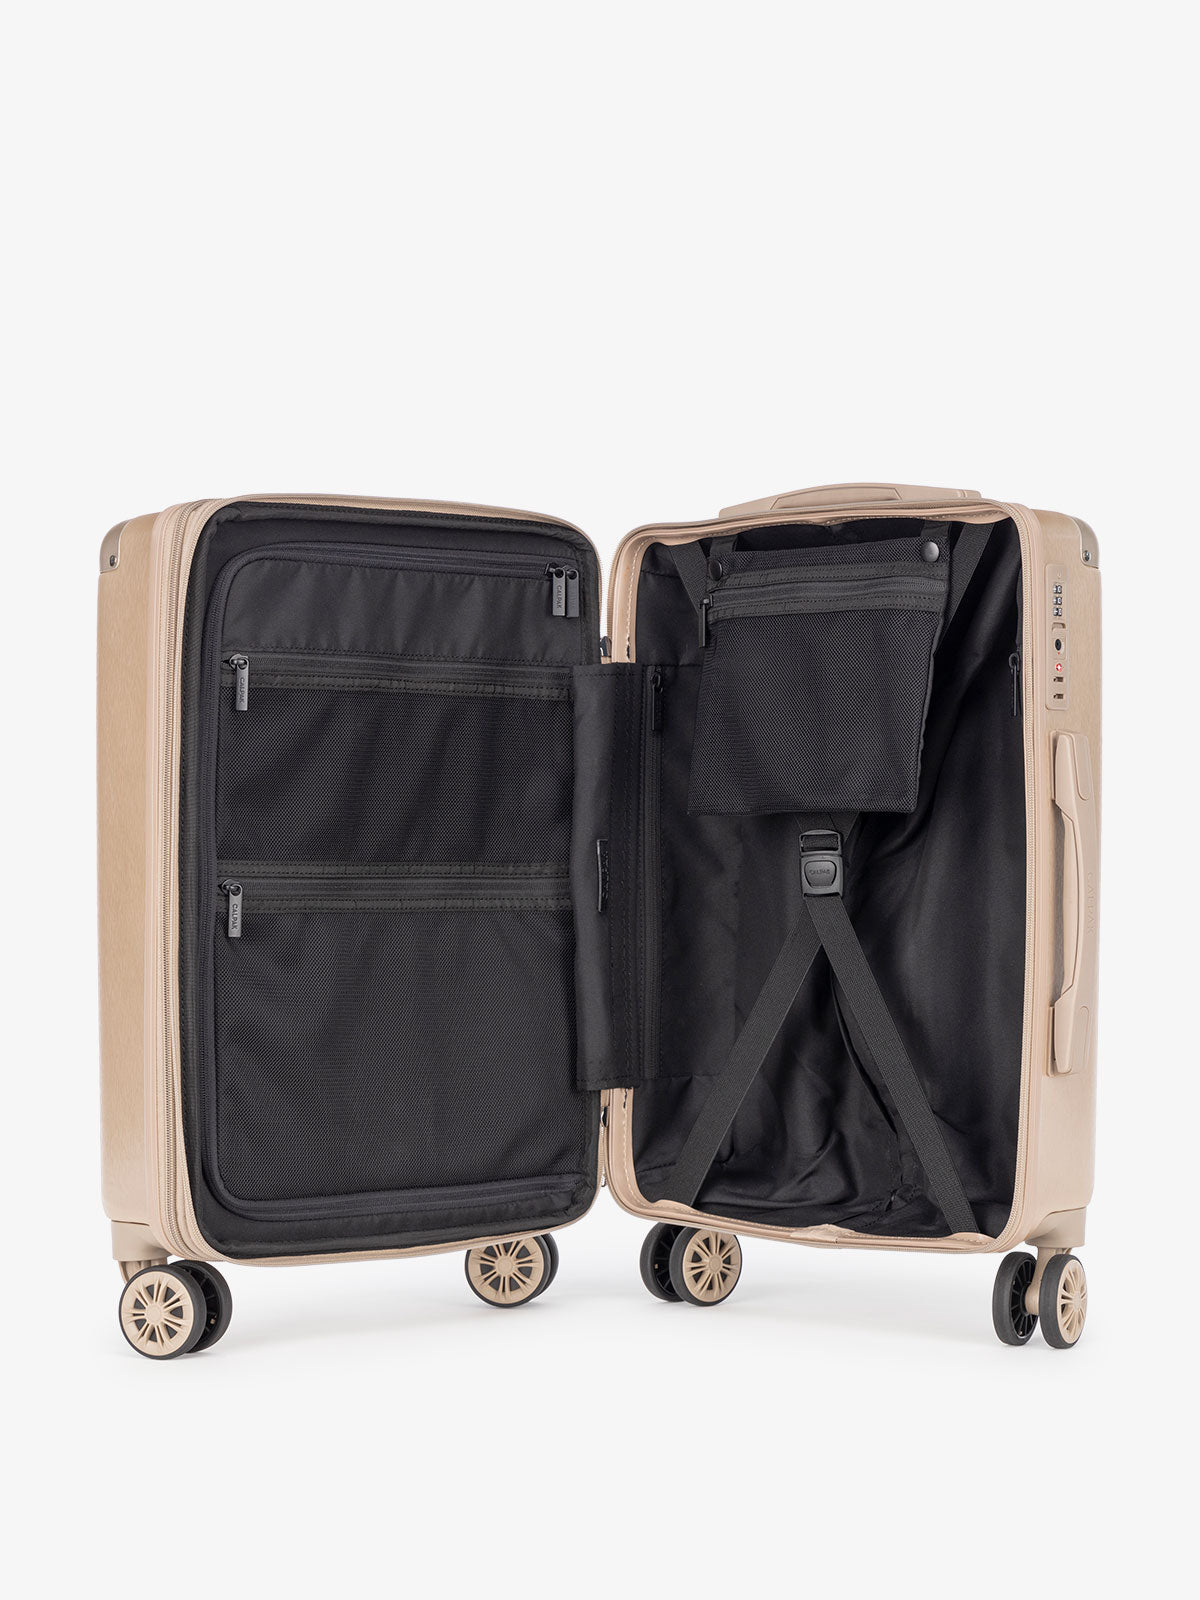 gold suitcase with mesh compartments and compression straps